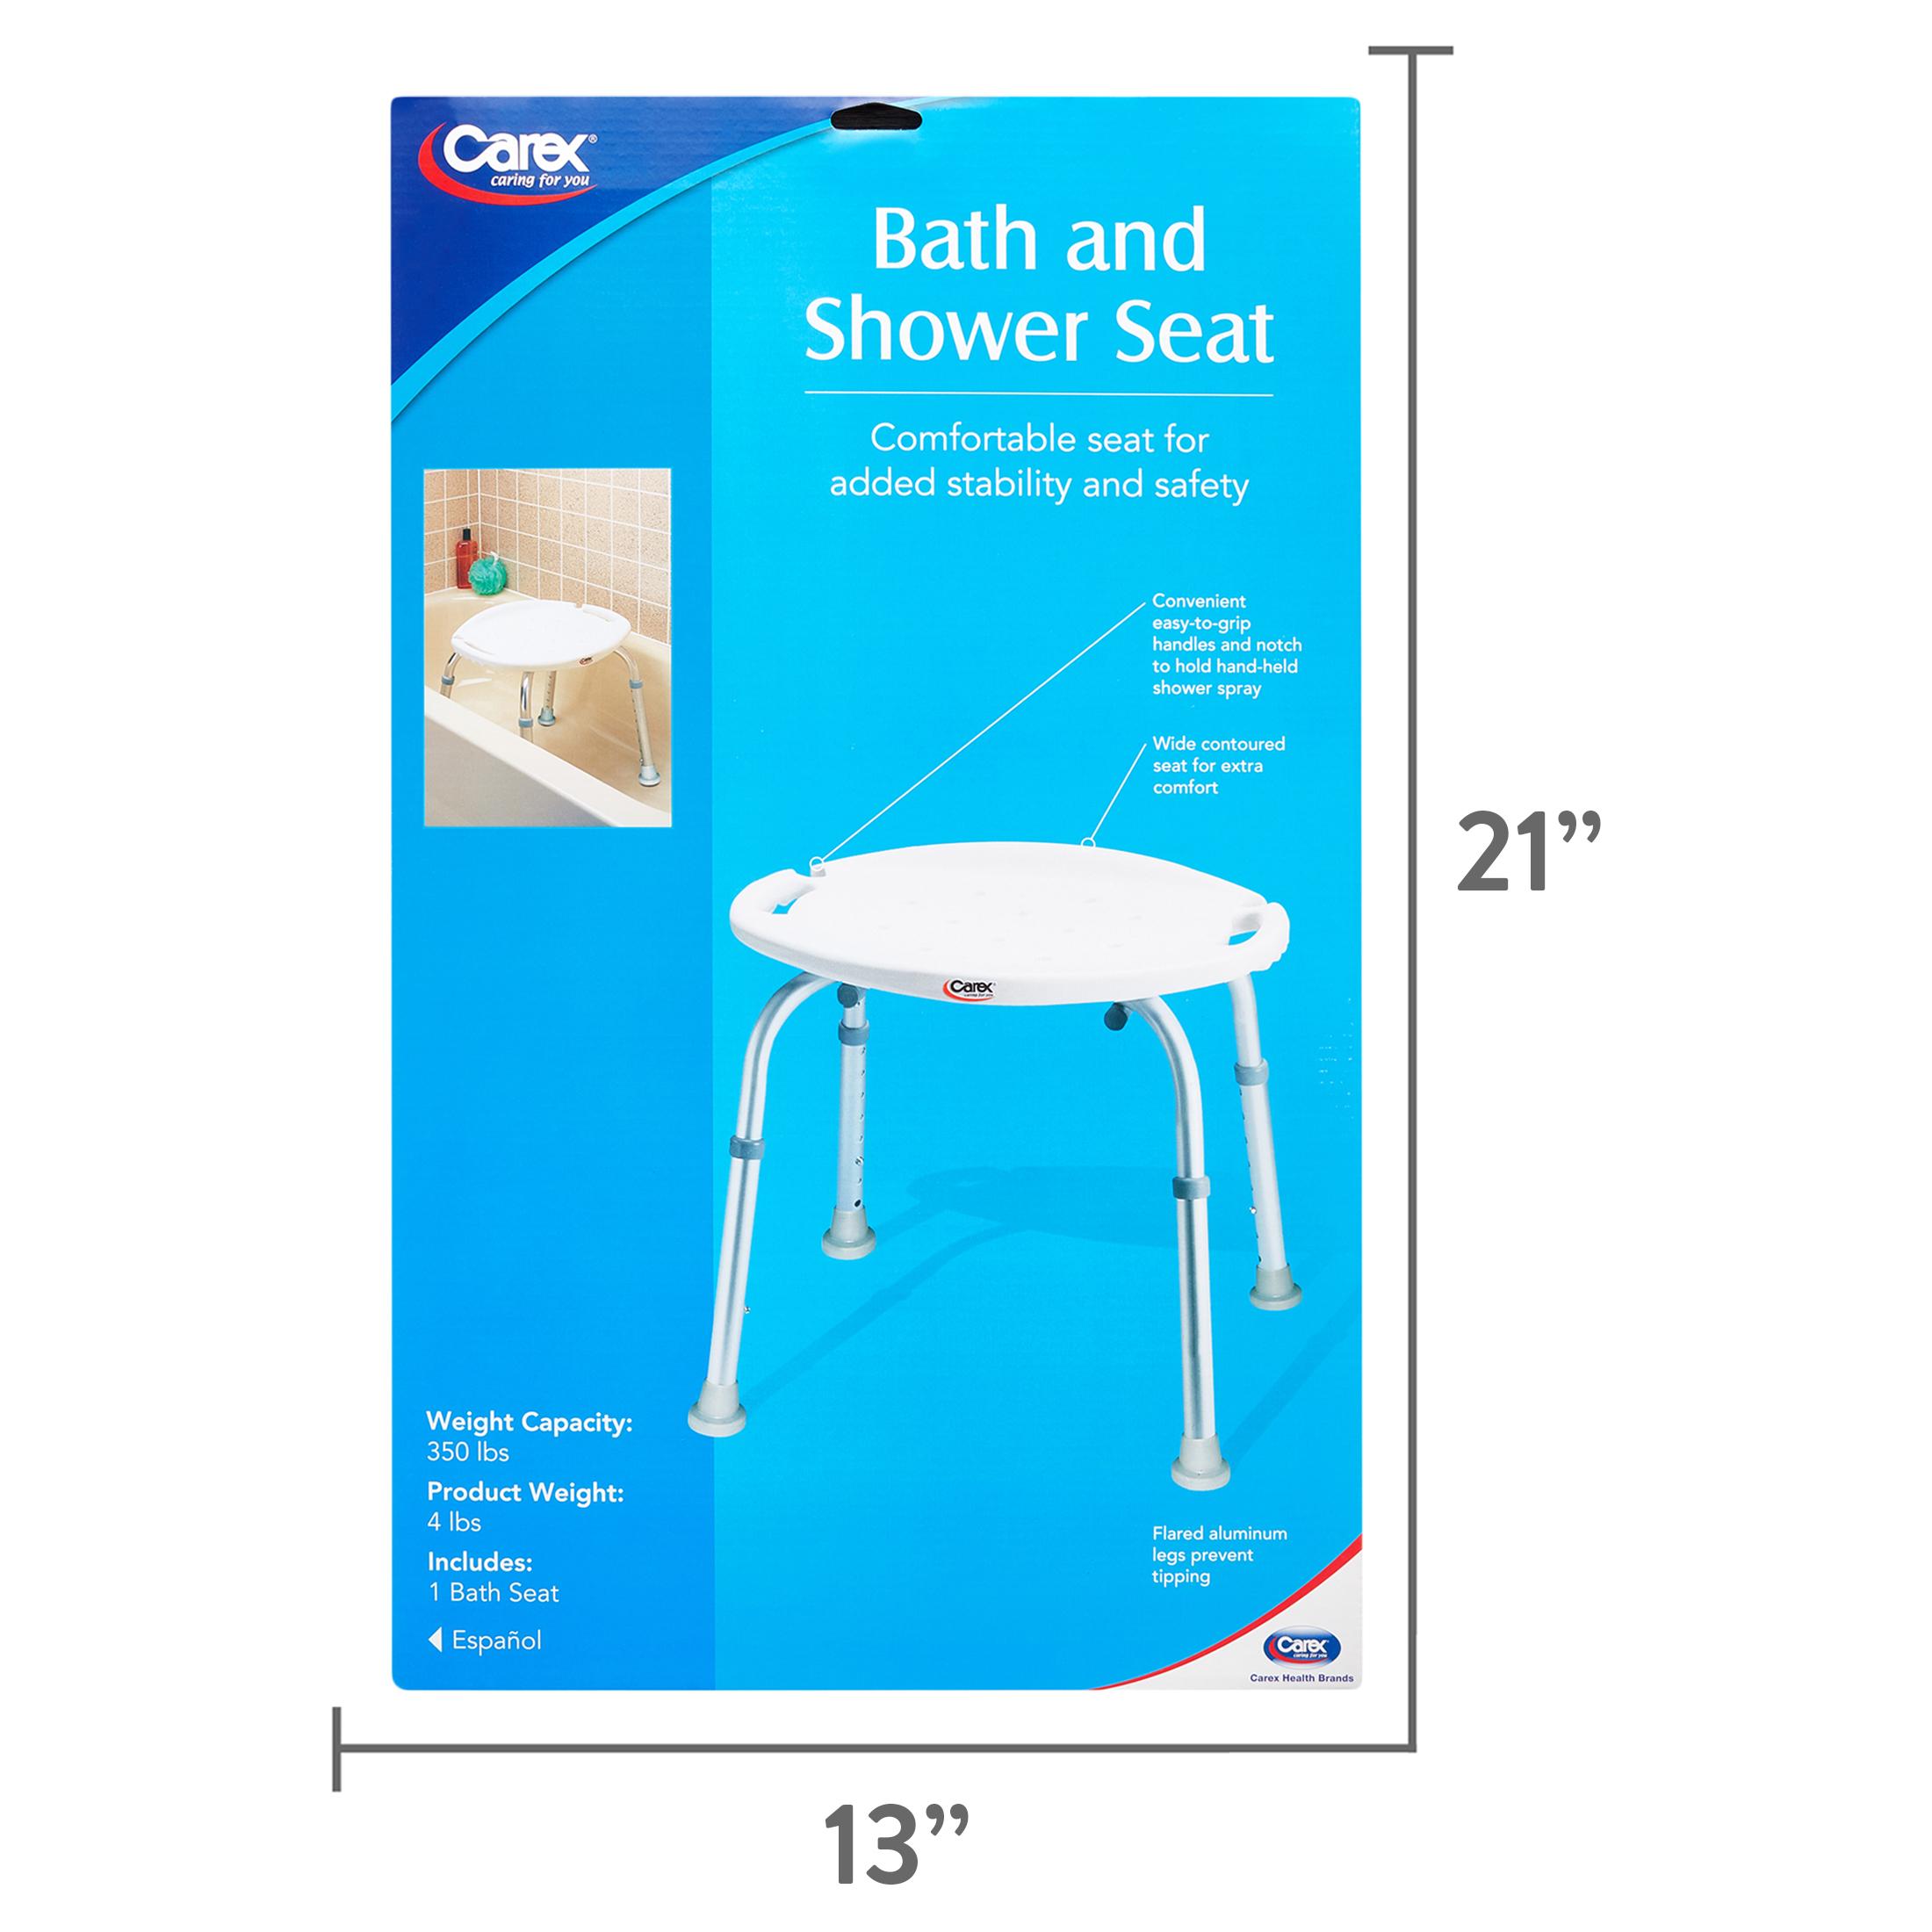 Carex Aluminium Bath and Shower Chair with Height Adjustable Legs, Built-in Notch, 300 lb Capacity - image 4 of 10